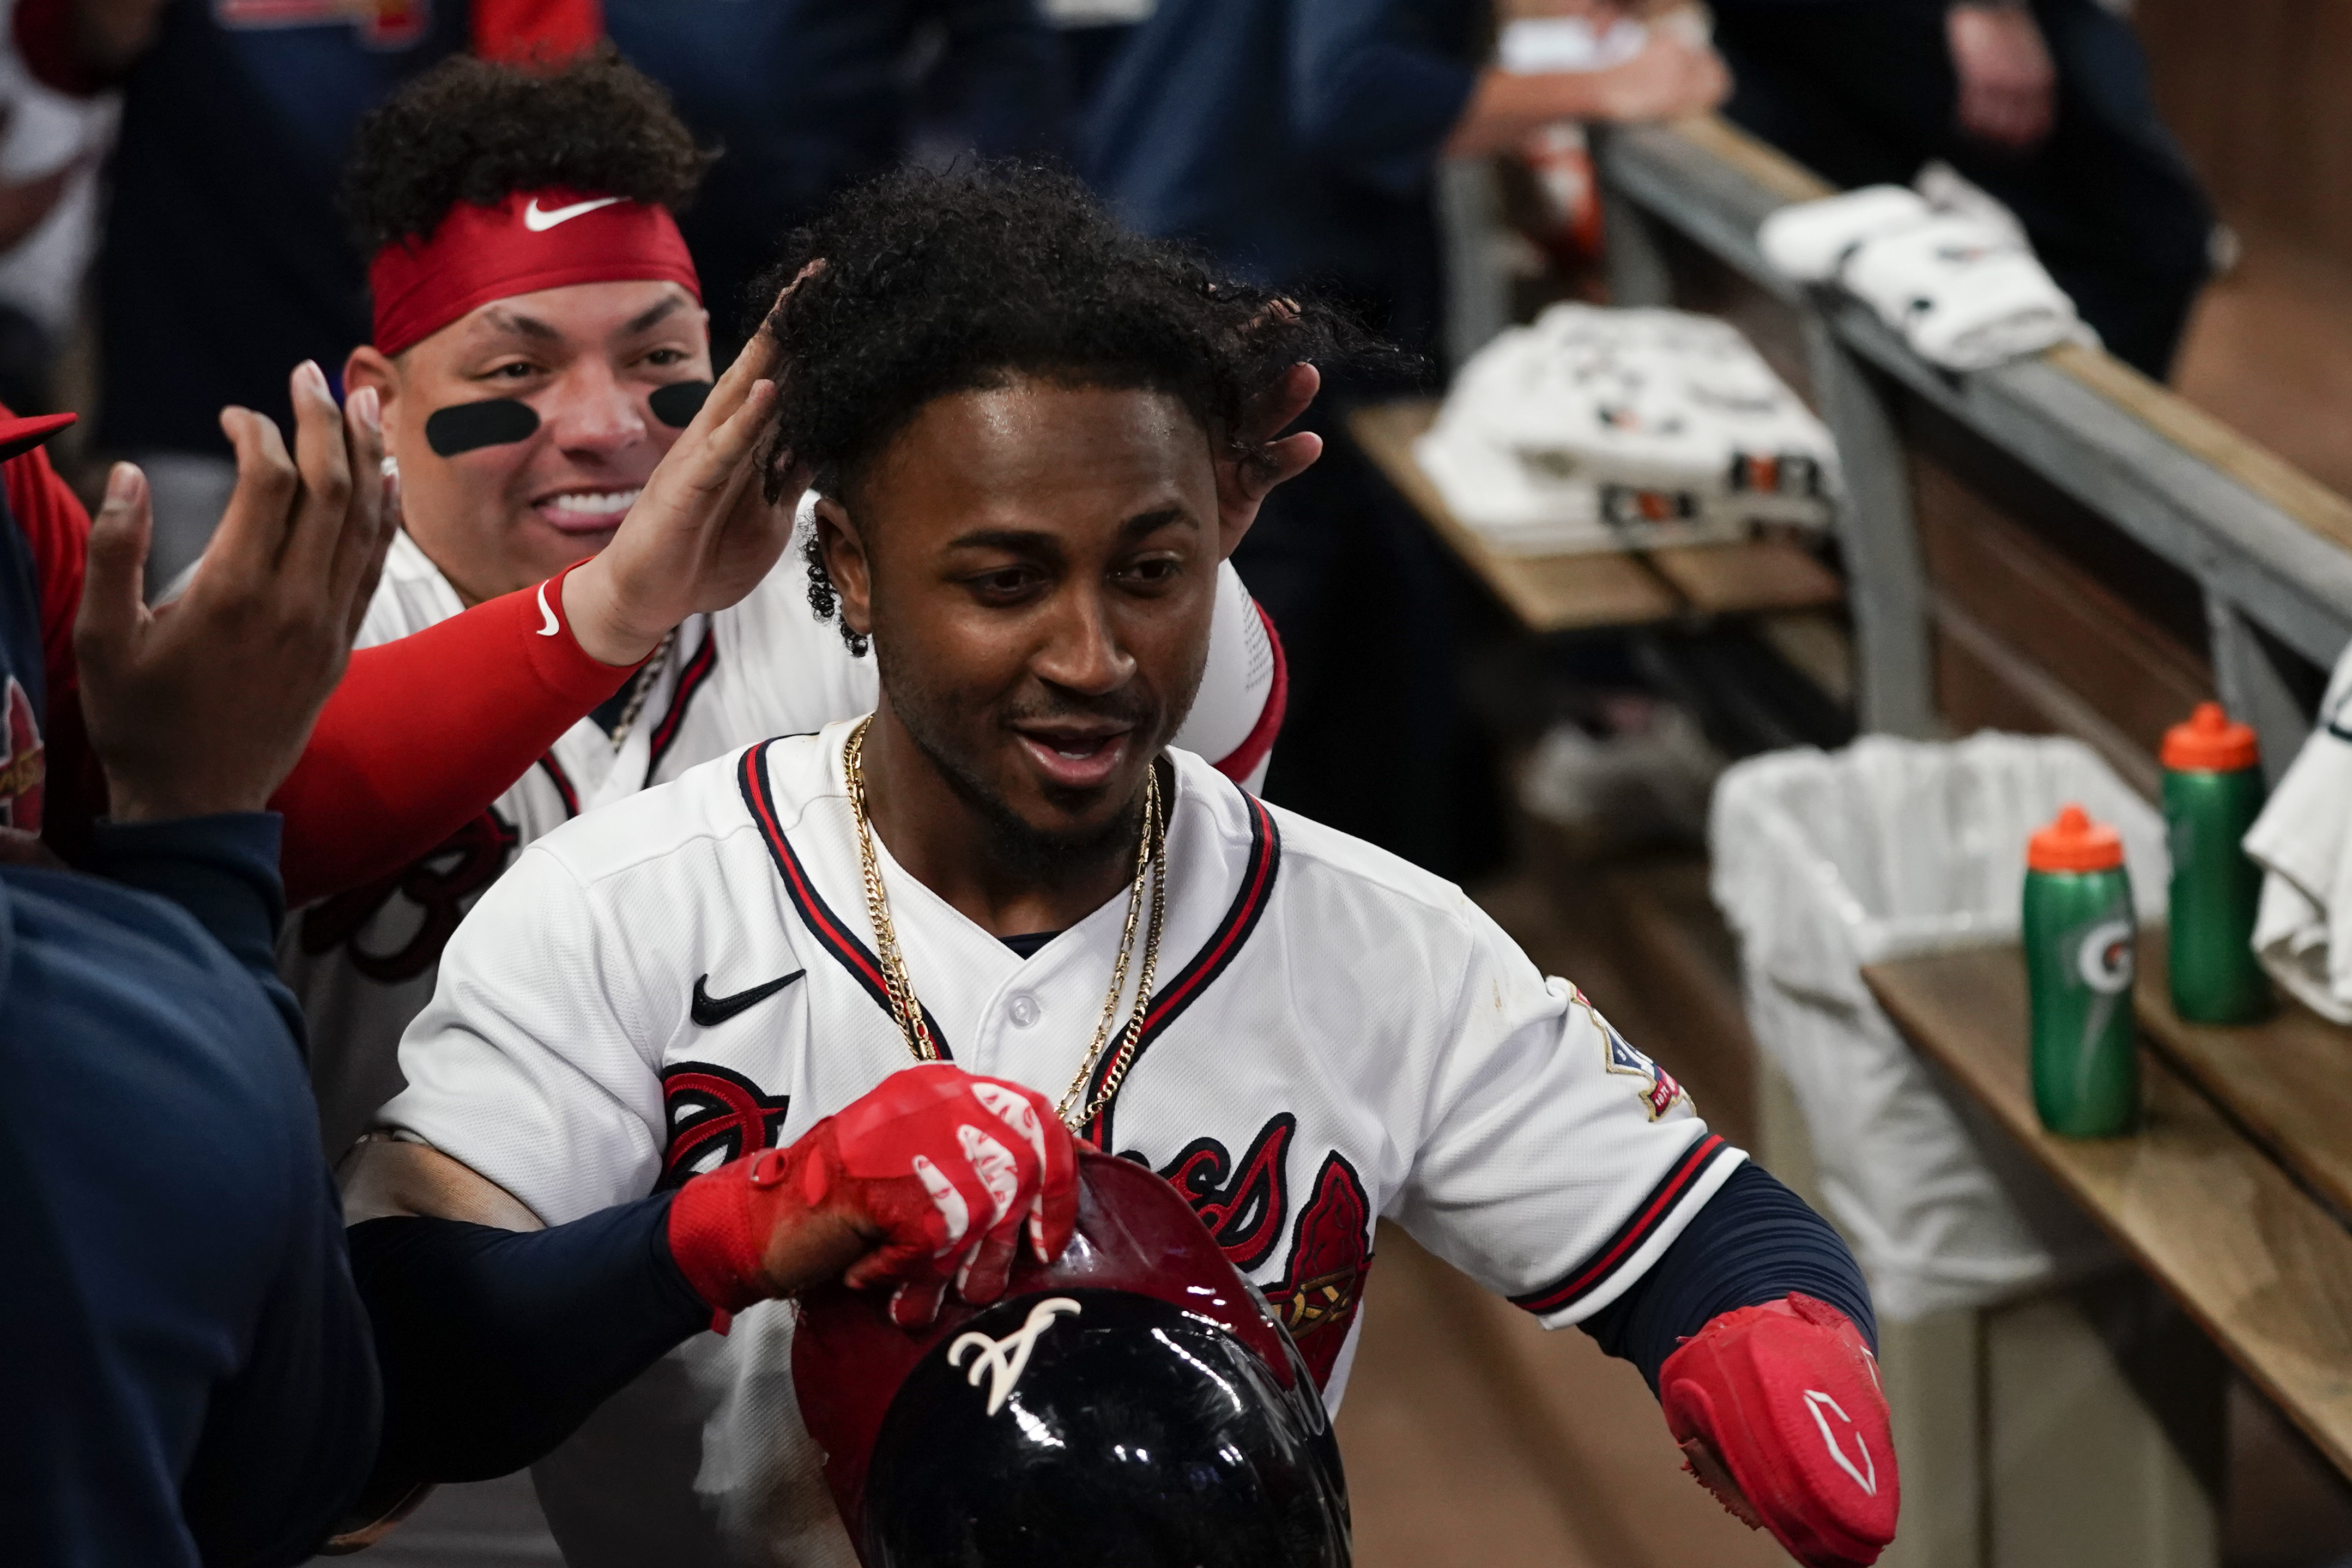 Lucky lumber: Rosario's hot bat leads Braves to Series